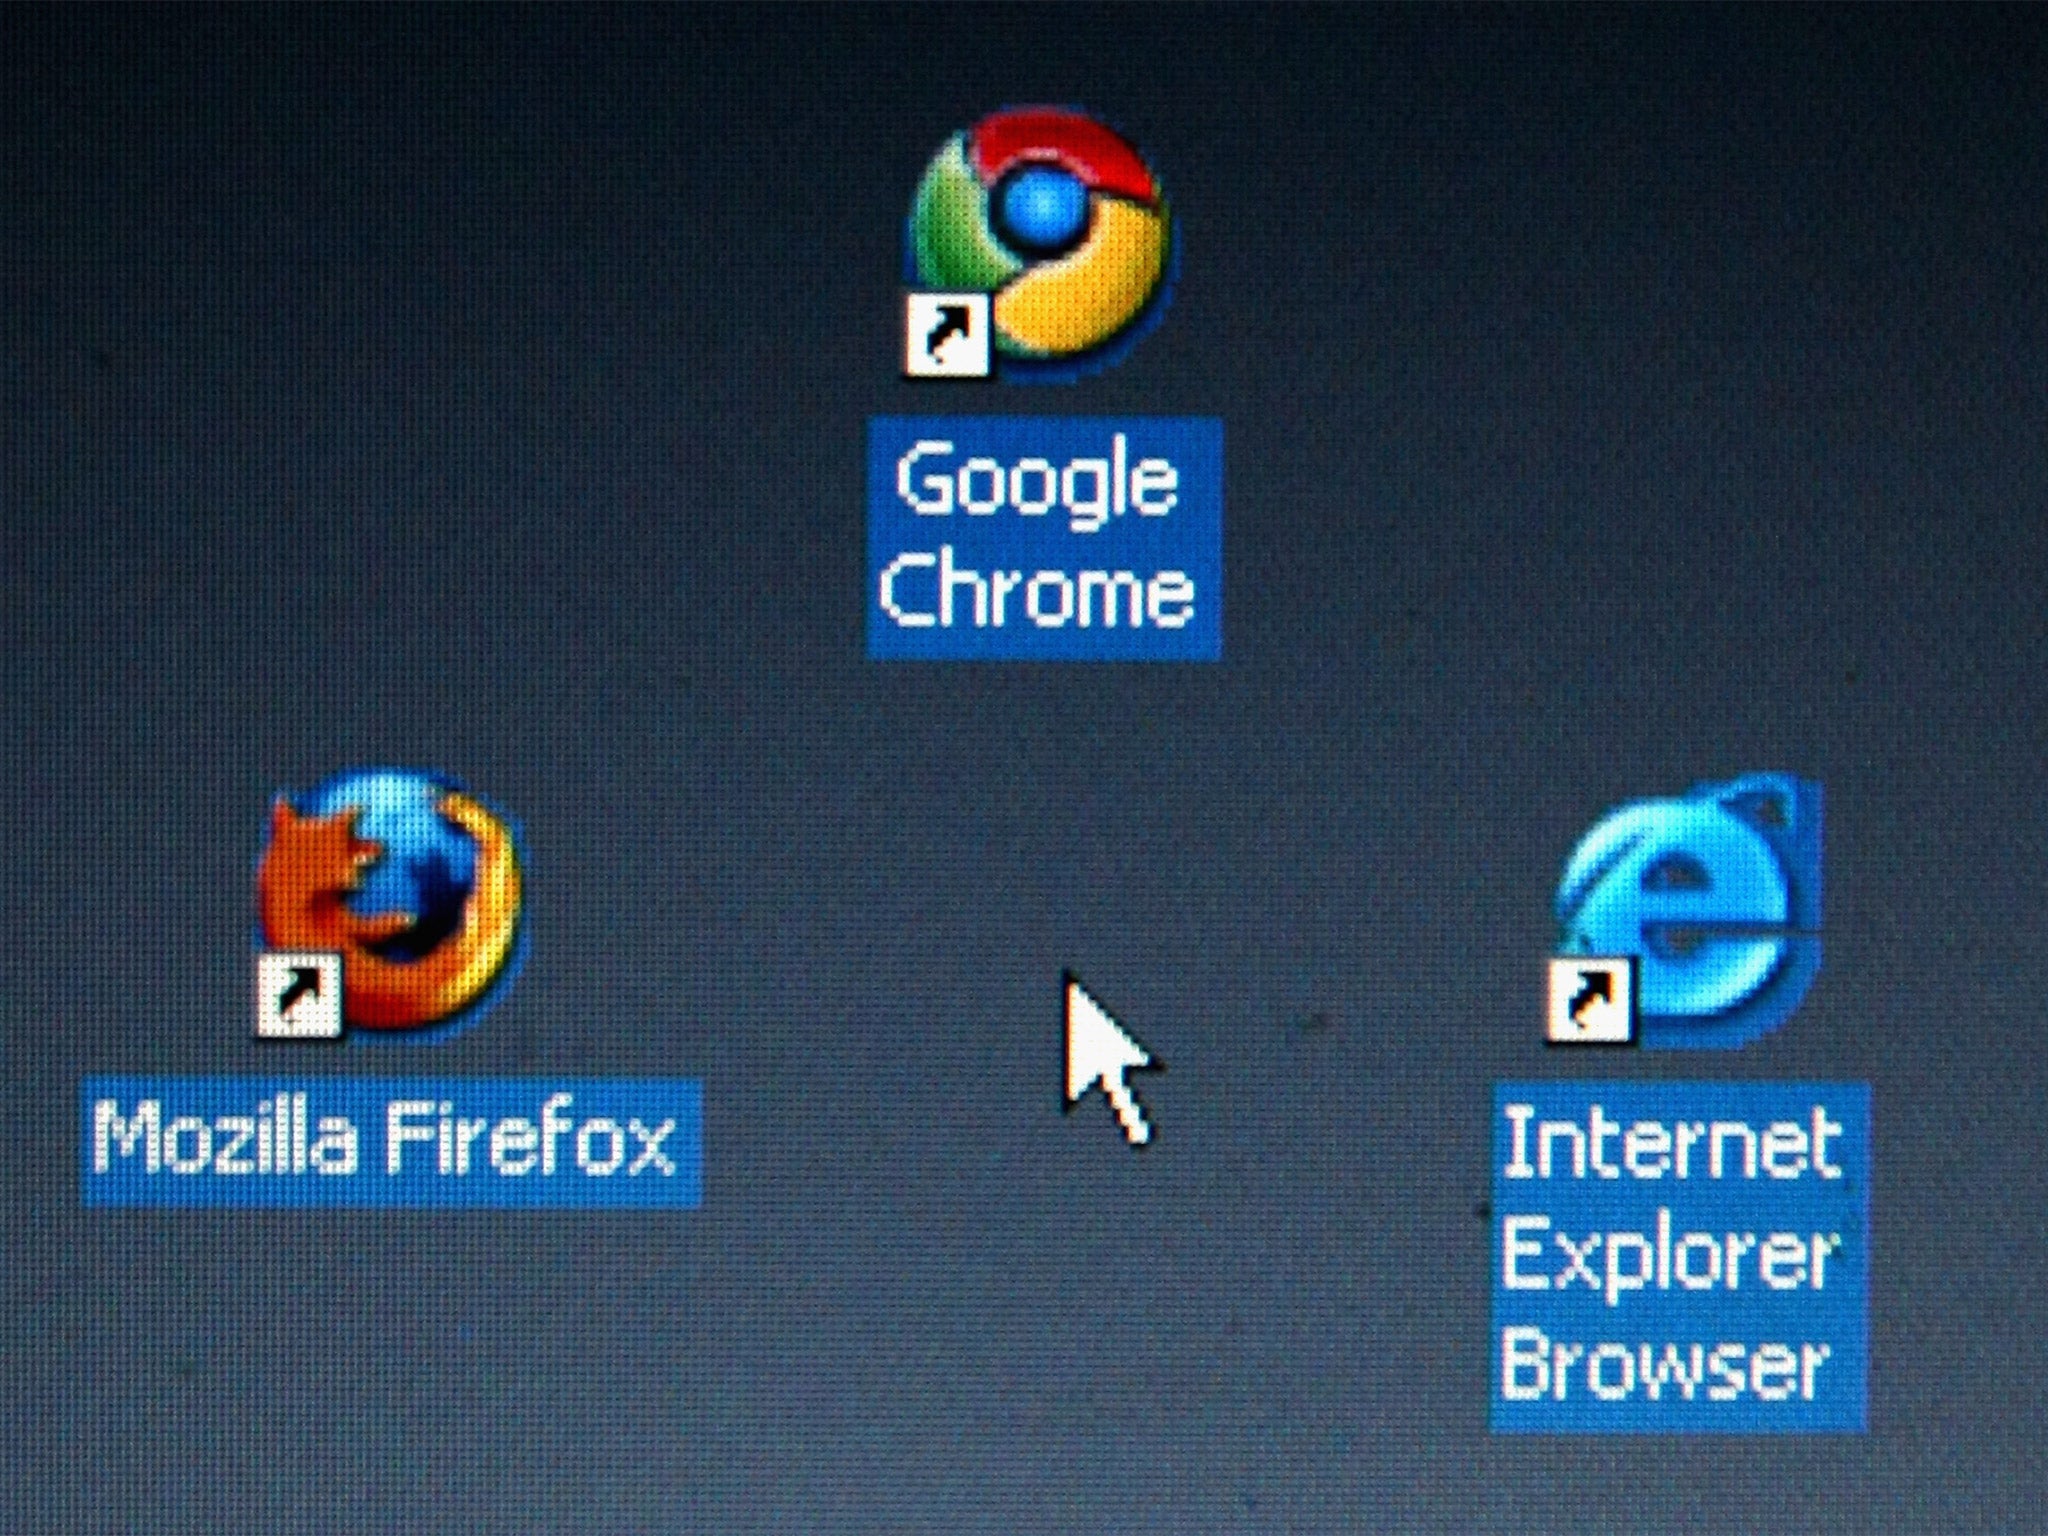 Competition from Google Chrome and Mozilla Firefox broke Microsoft's web browser dominance